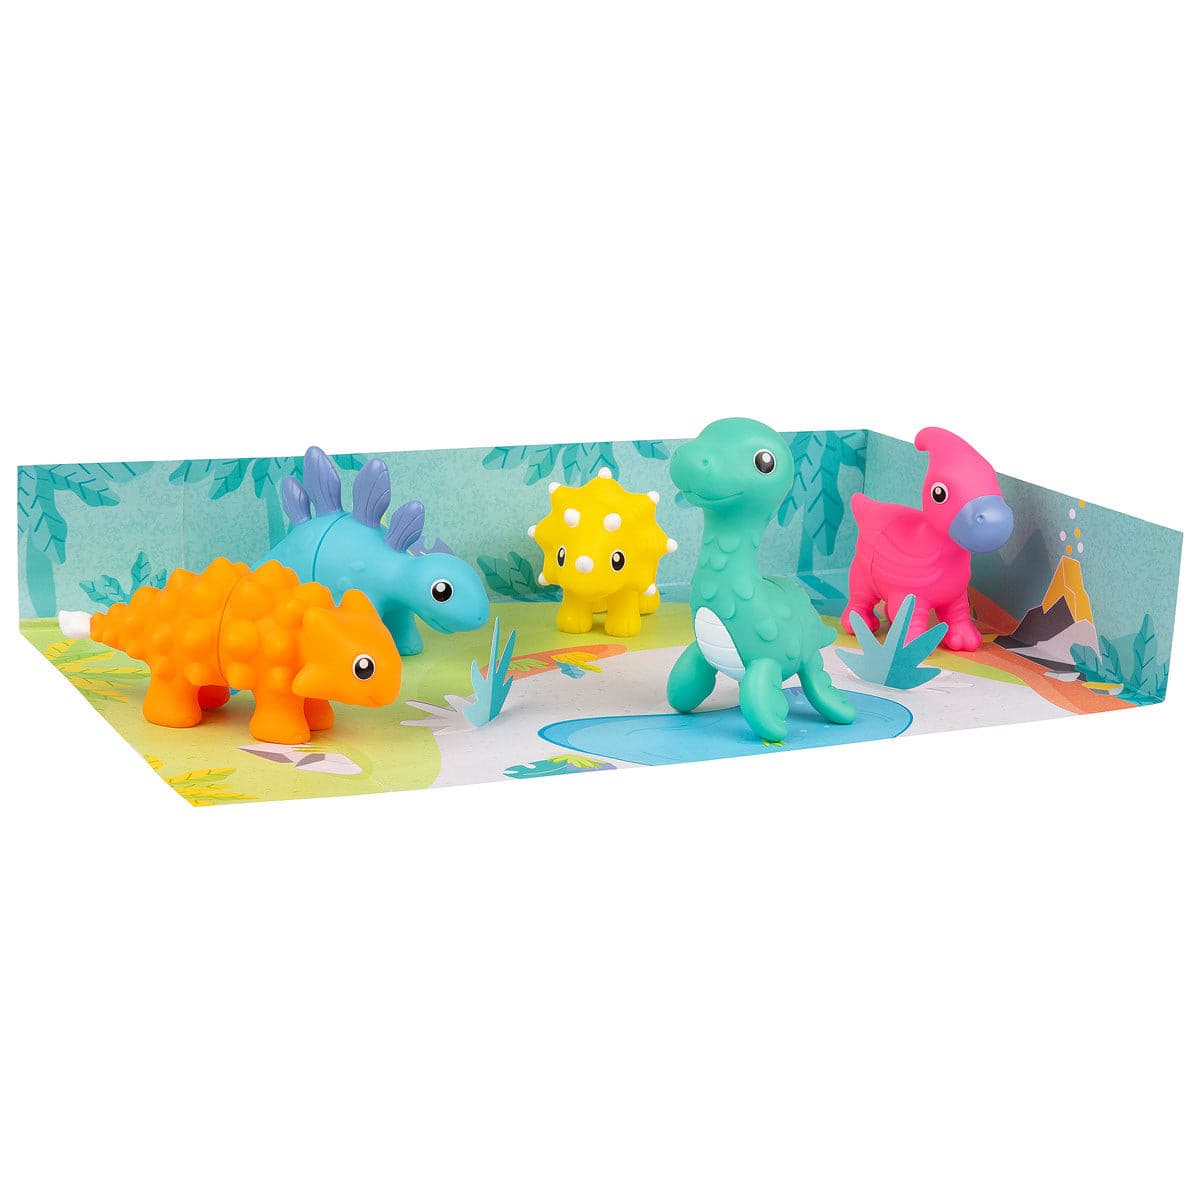 Playgro Build and Play Mix N Match Dinosaurs.